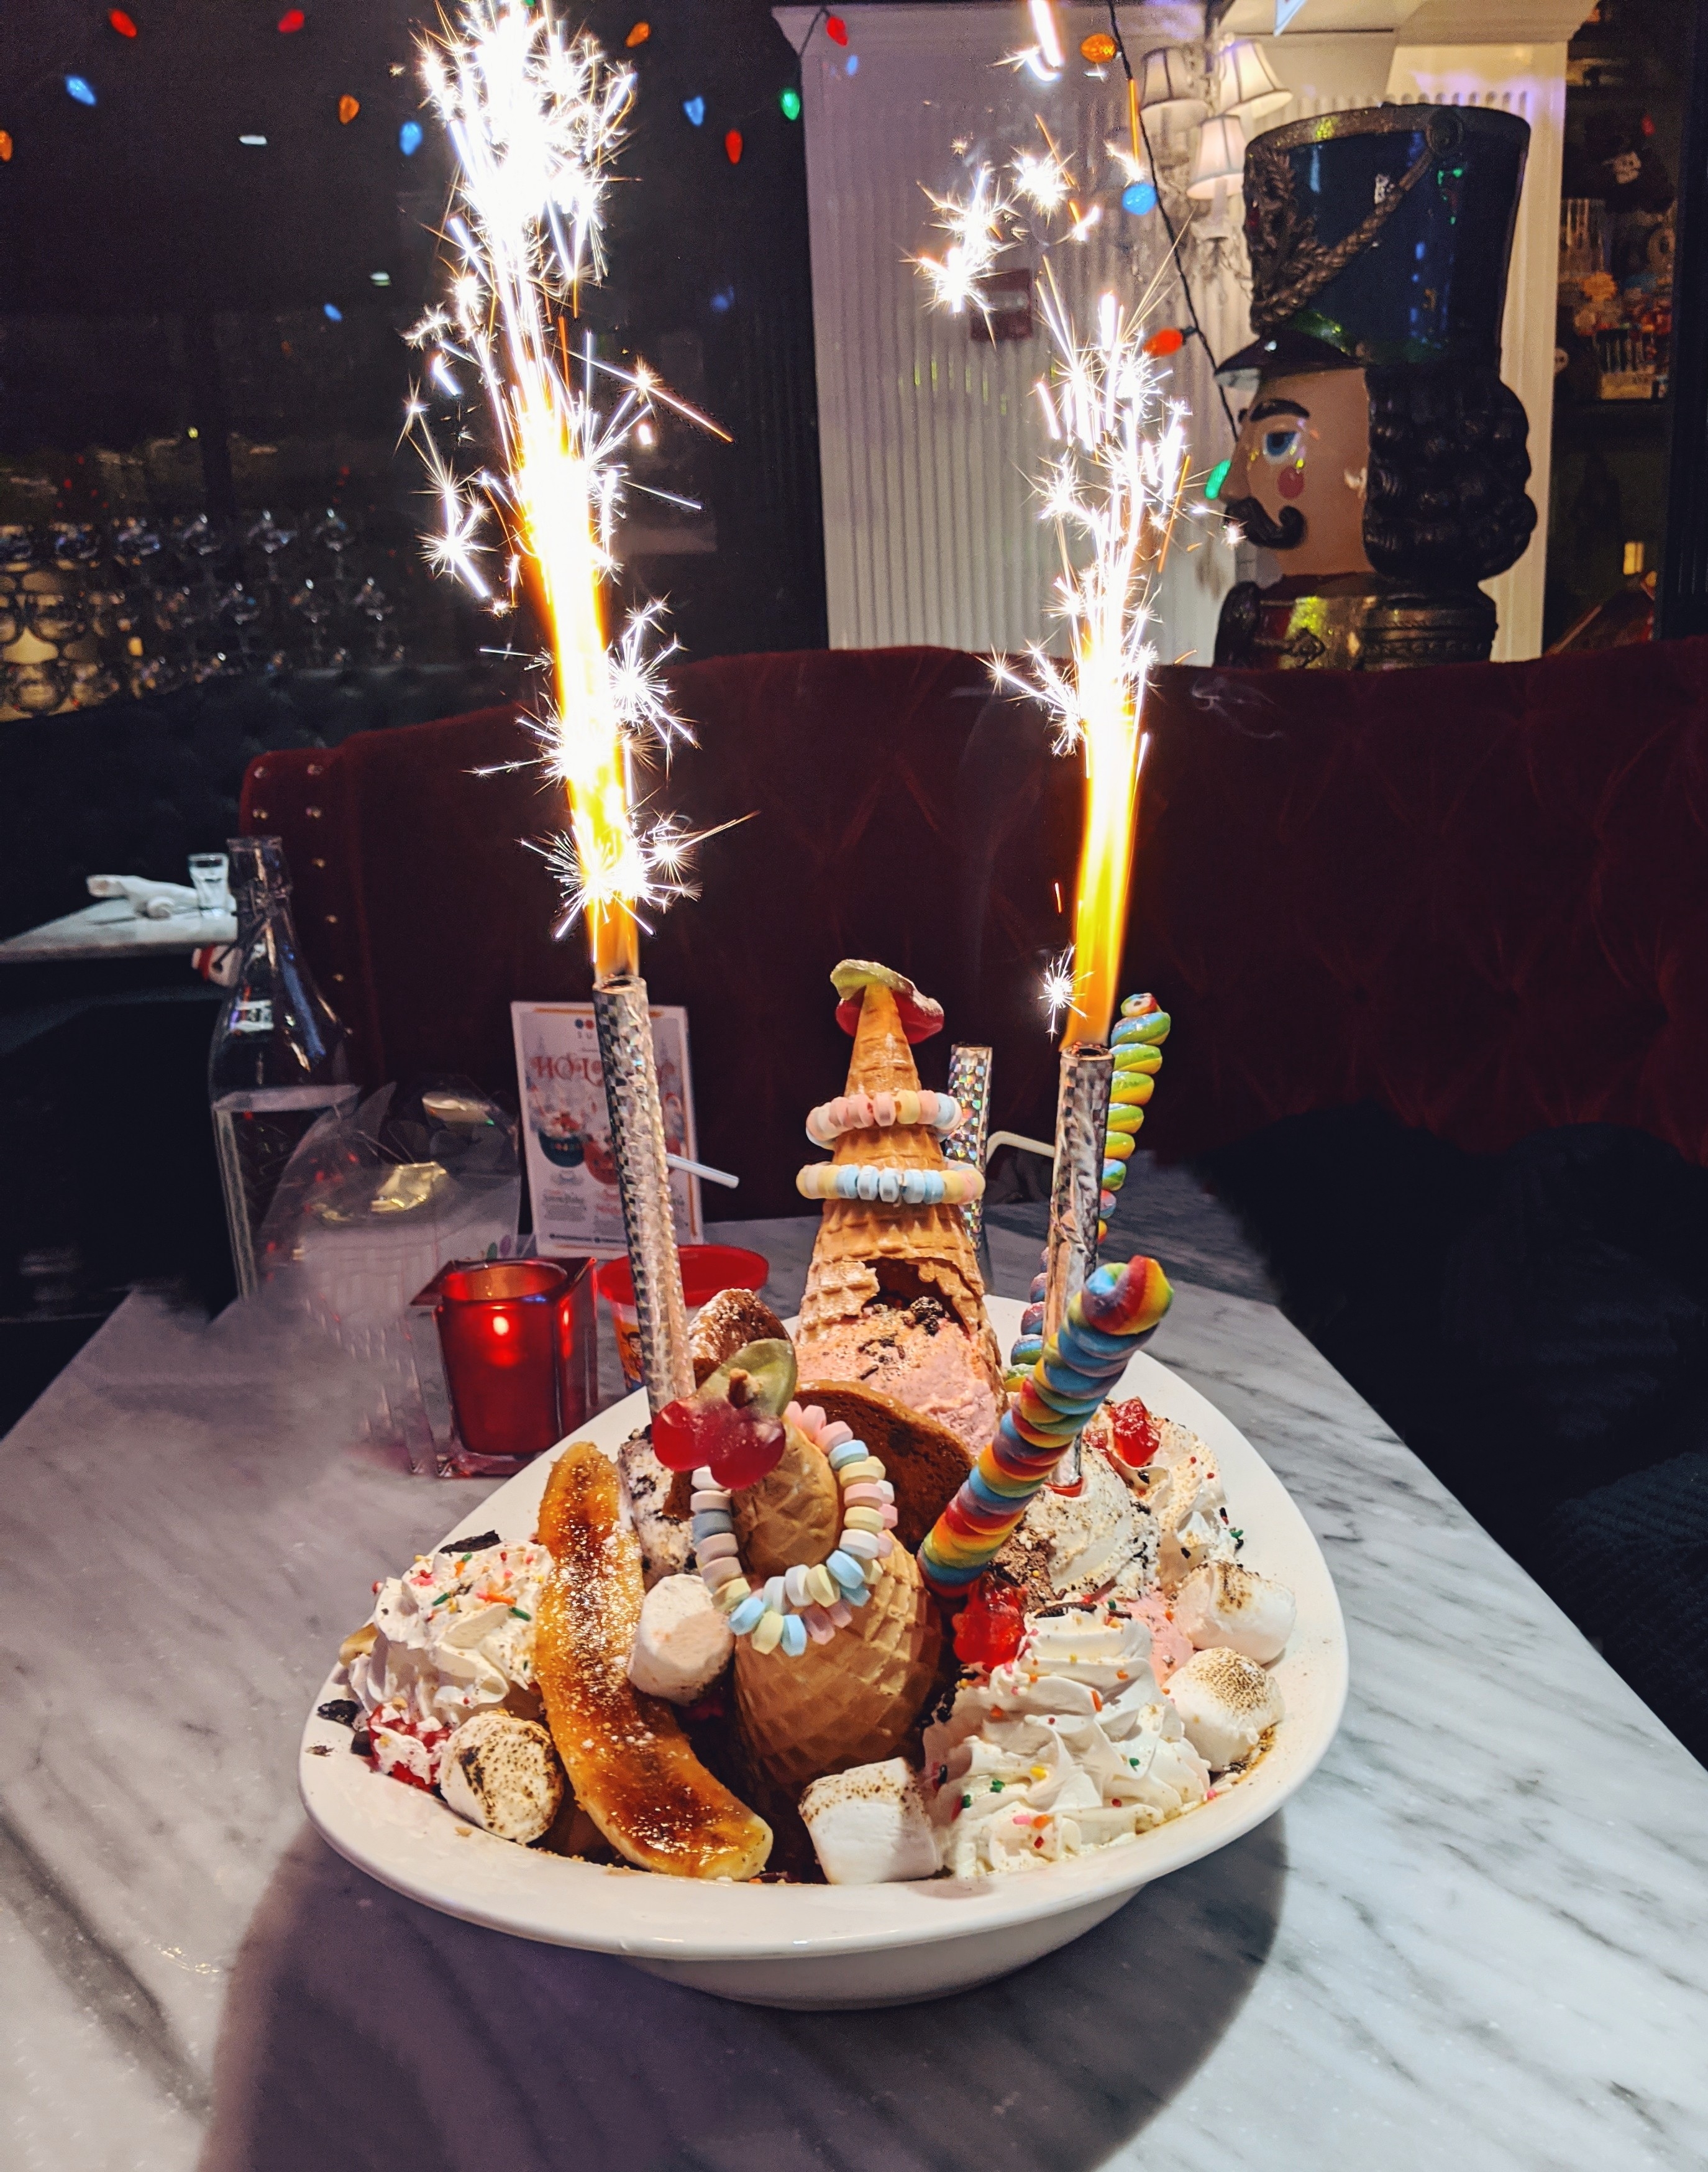 Sugar Factory Chicago - Instagrammable Restaurants in Chicago - If you're looking for the most Instagram worthy places in Chicago, you have to check out Sugar Factory! Their King Kong Sundae is the dessert of a lifetime. #sugarfactory #chicago #choosechicago